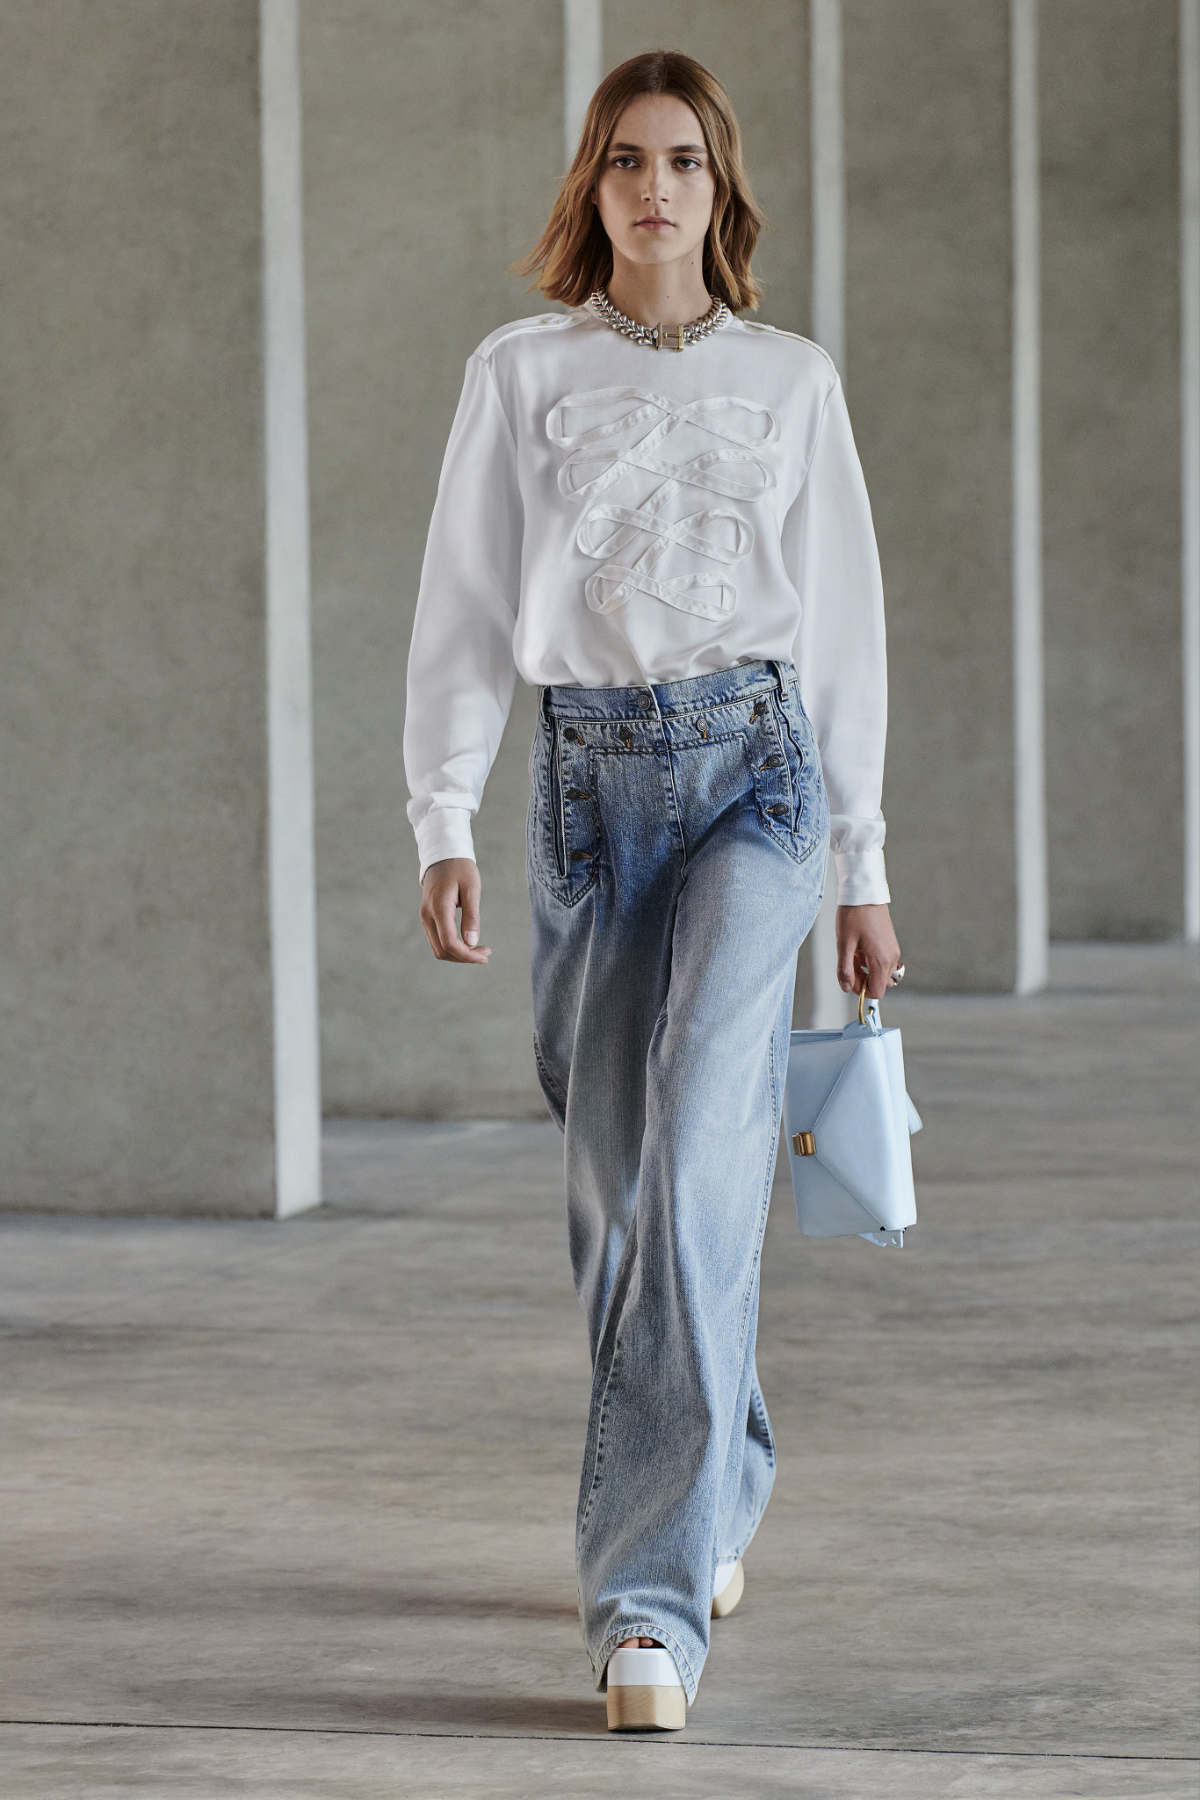 PORTS 1961 Presents Its New Resort 2023 Collection